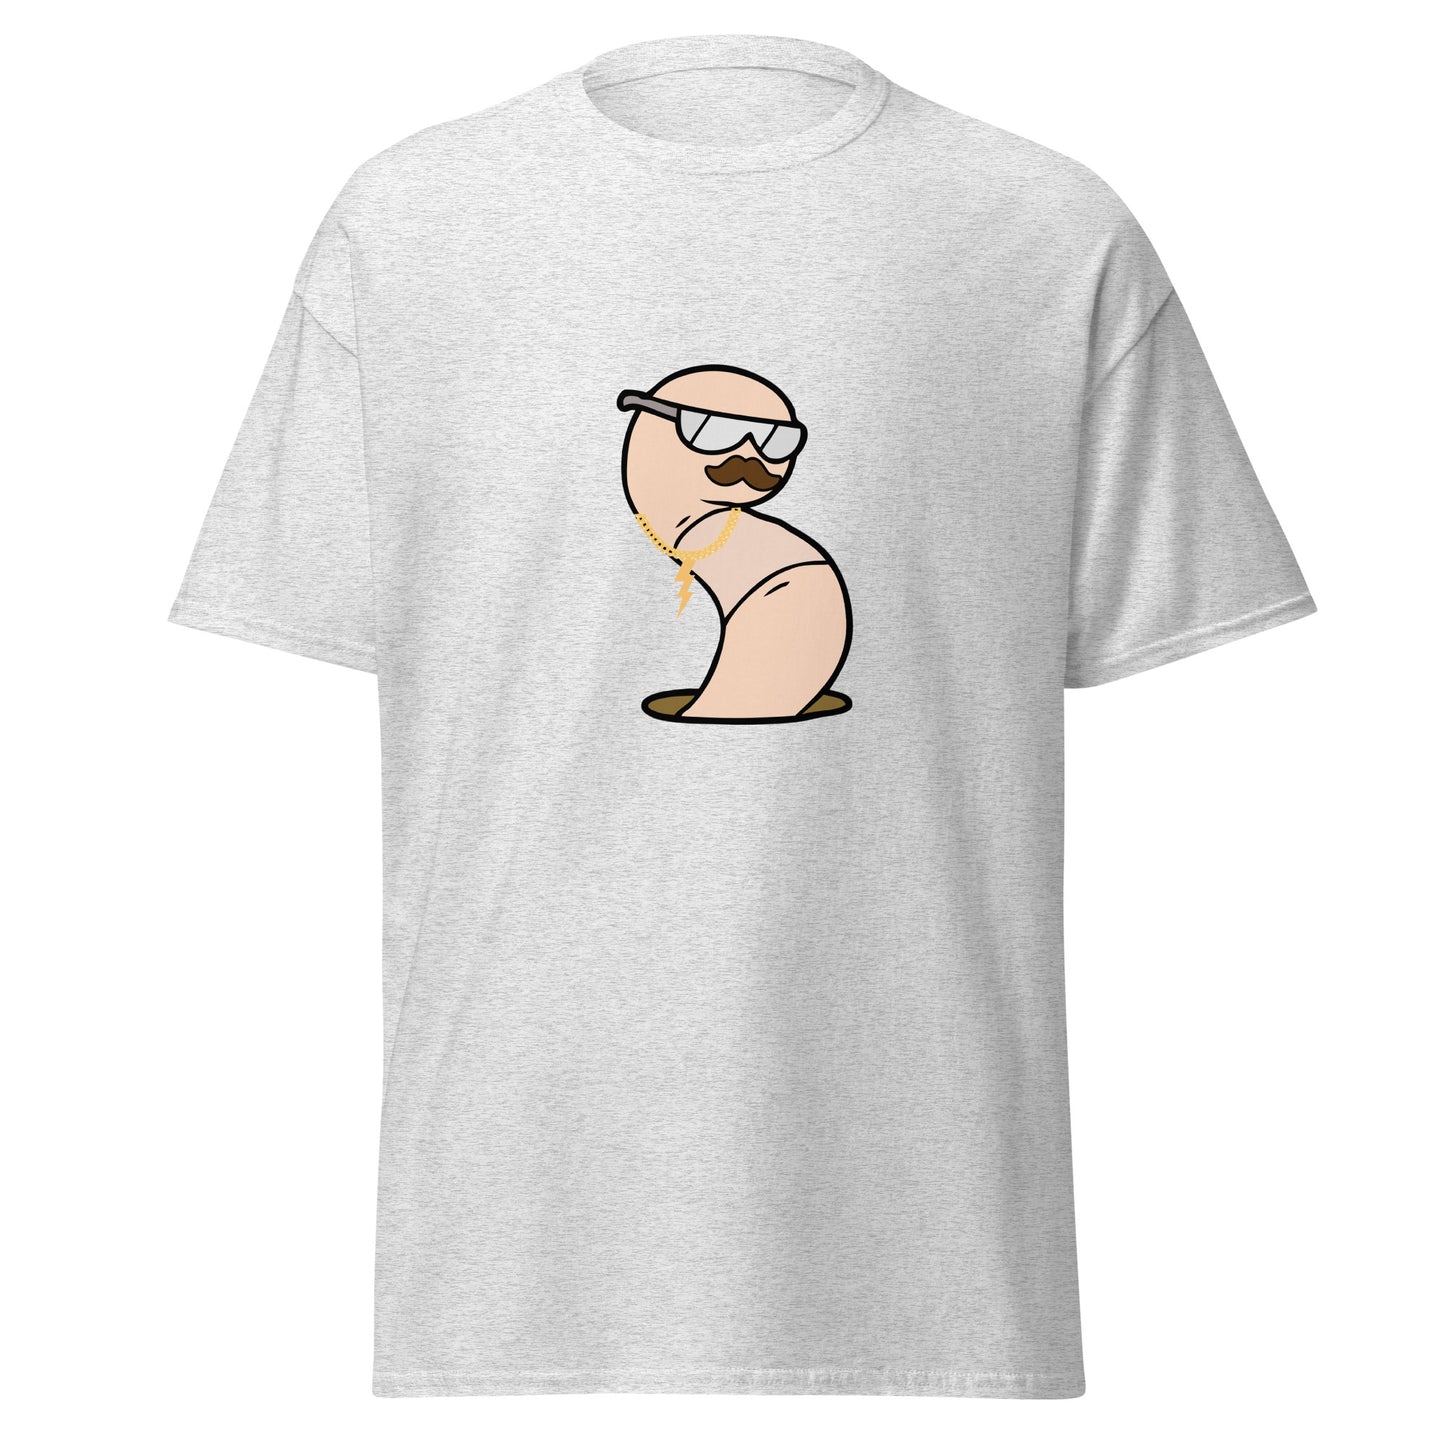 You're a Worm - Unisex